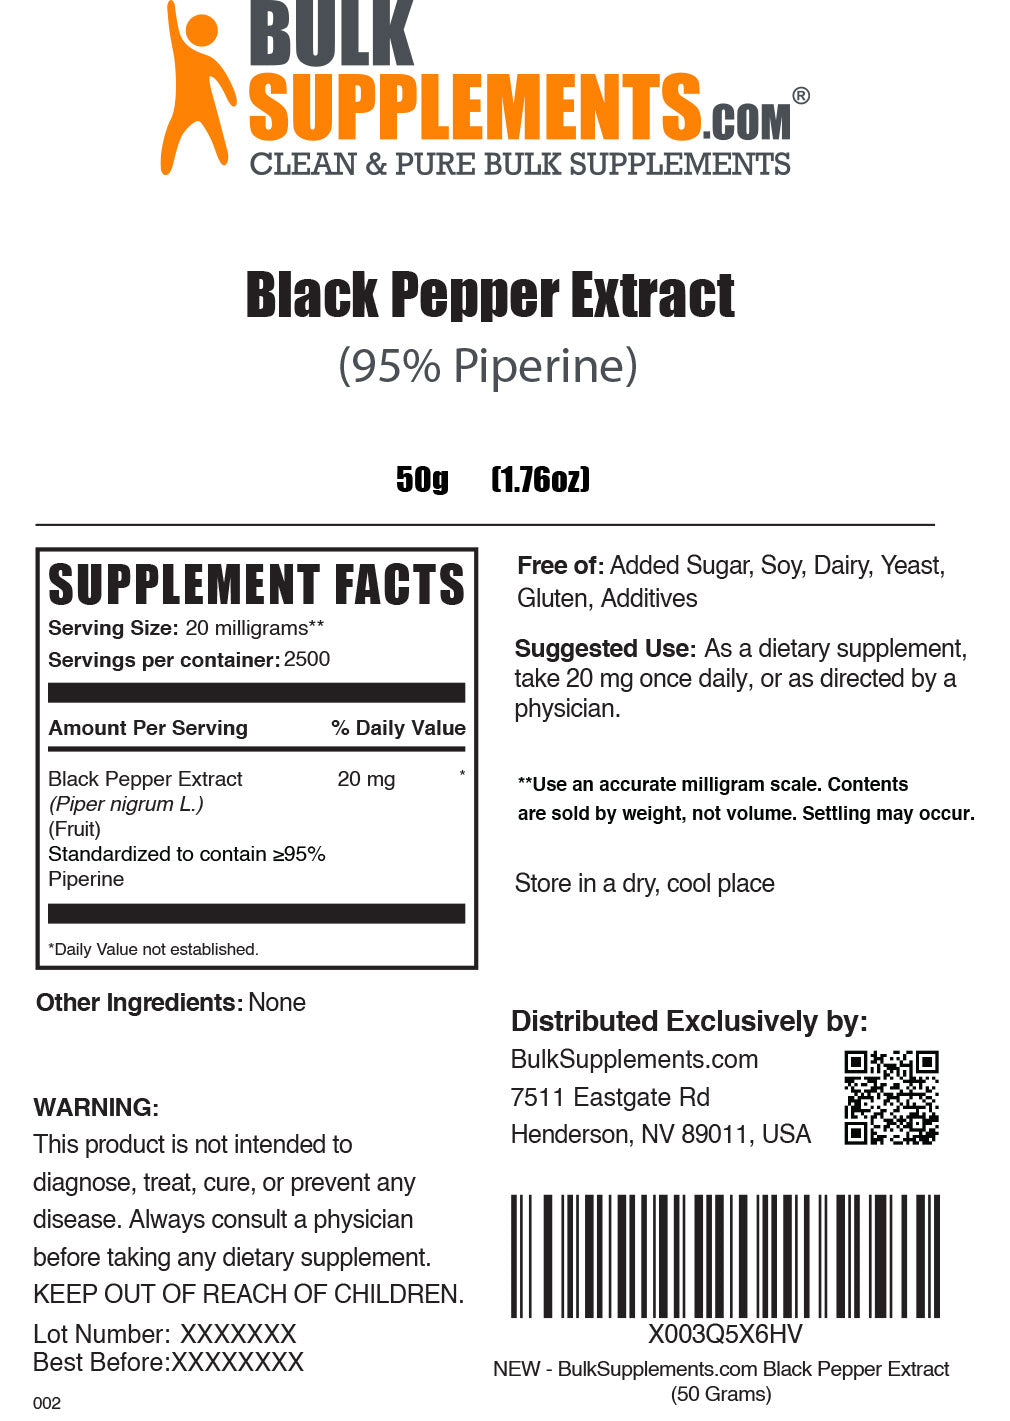 500g black pepper extract supplement facts